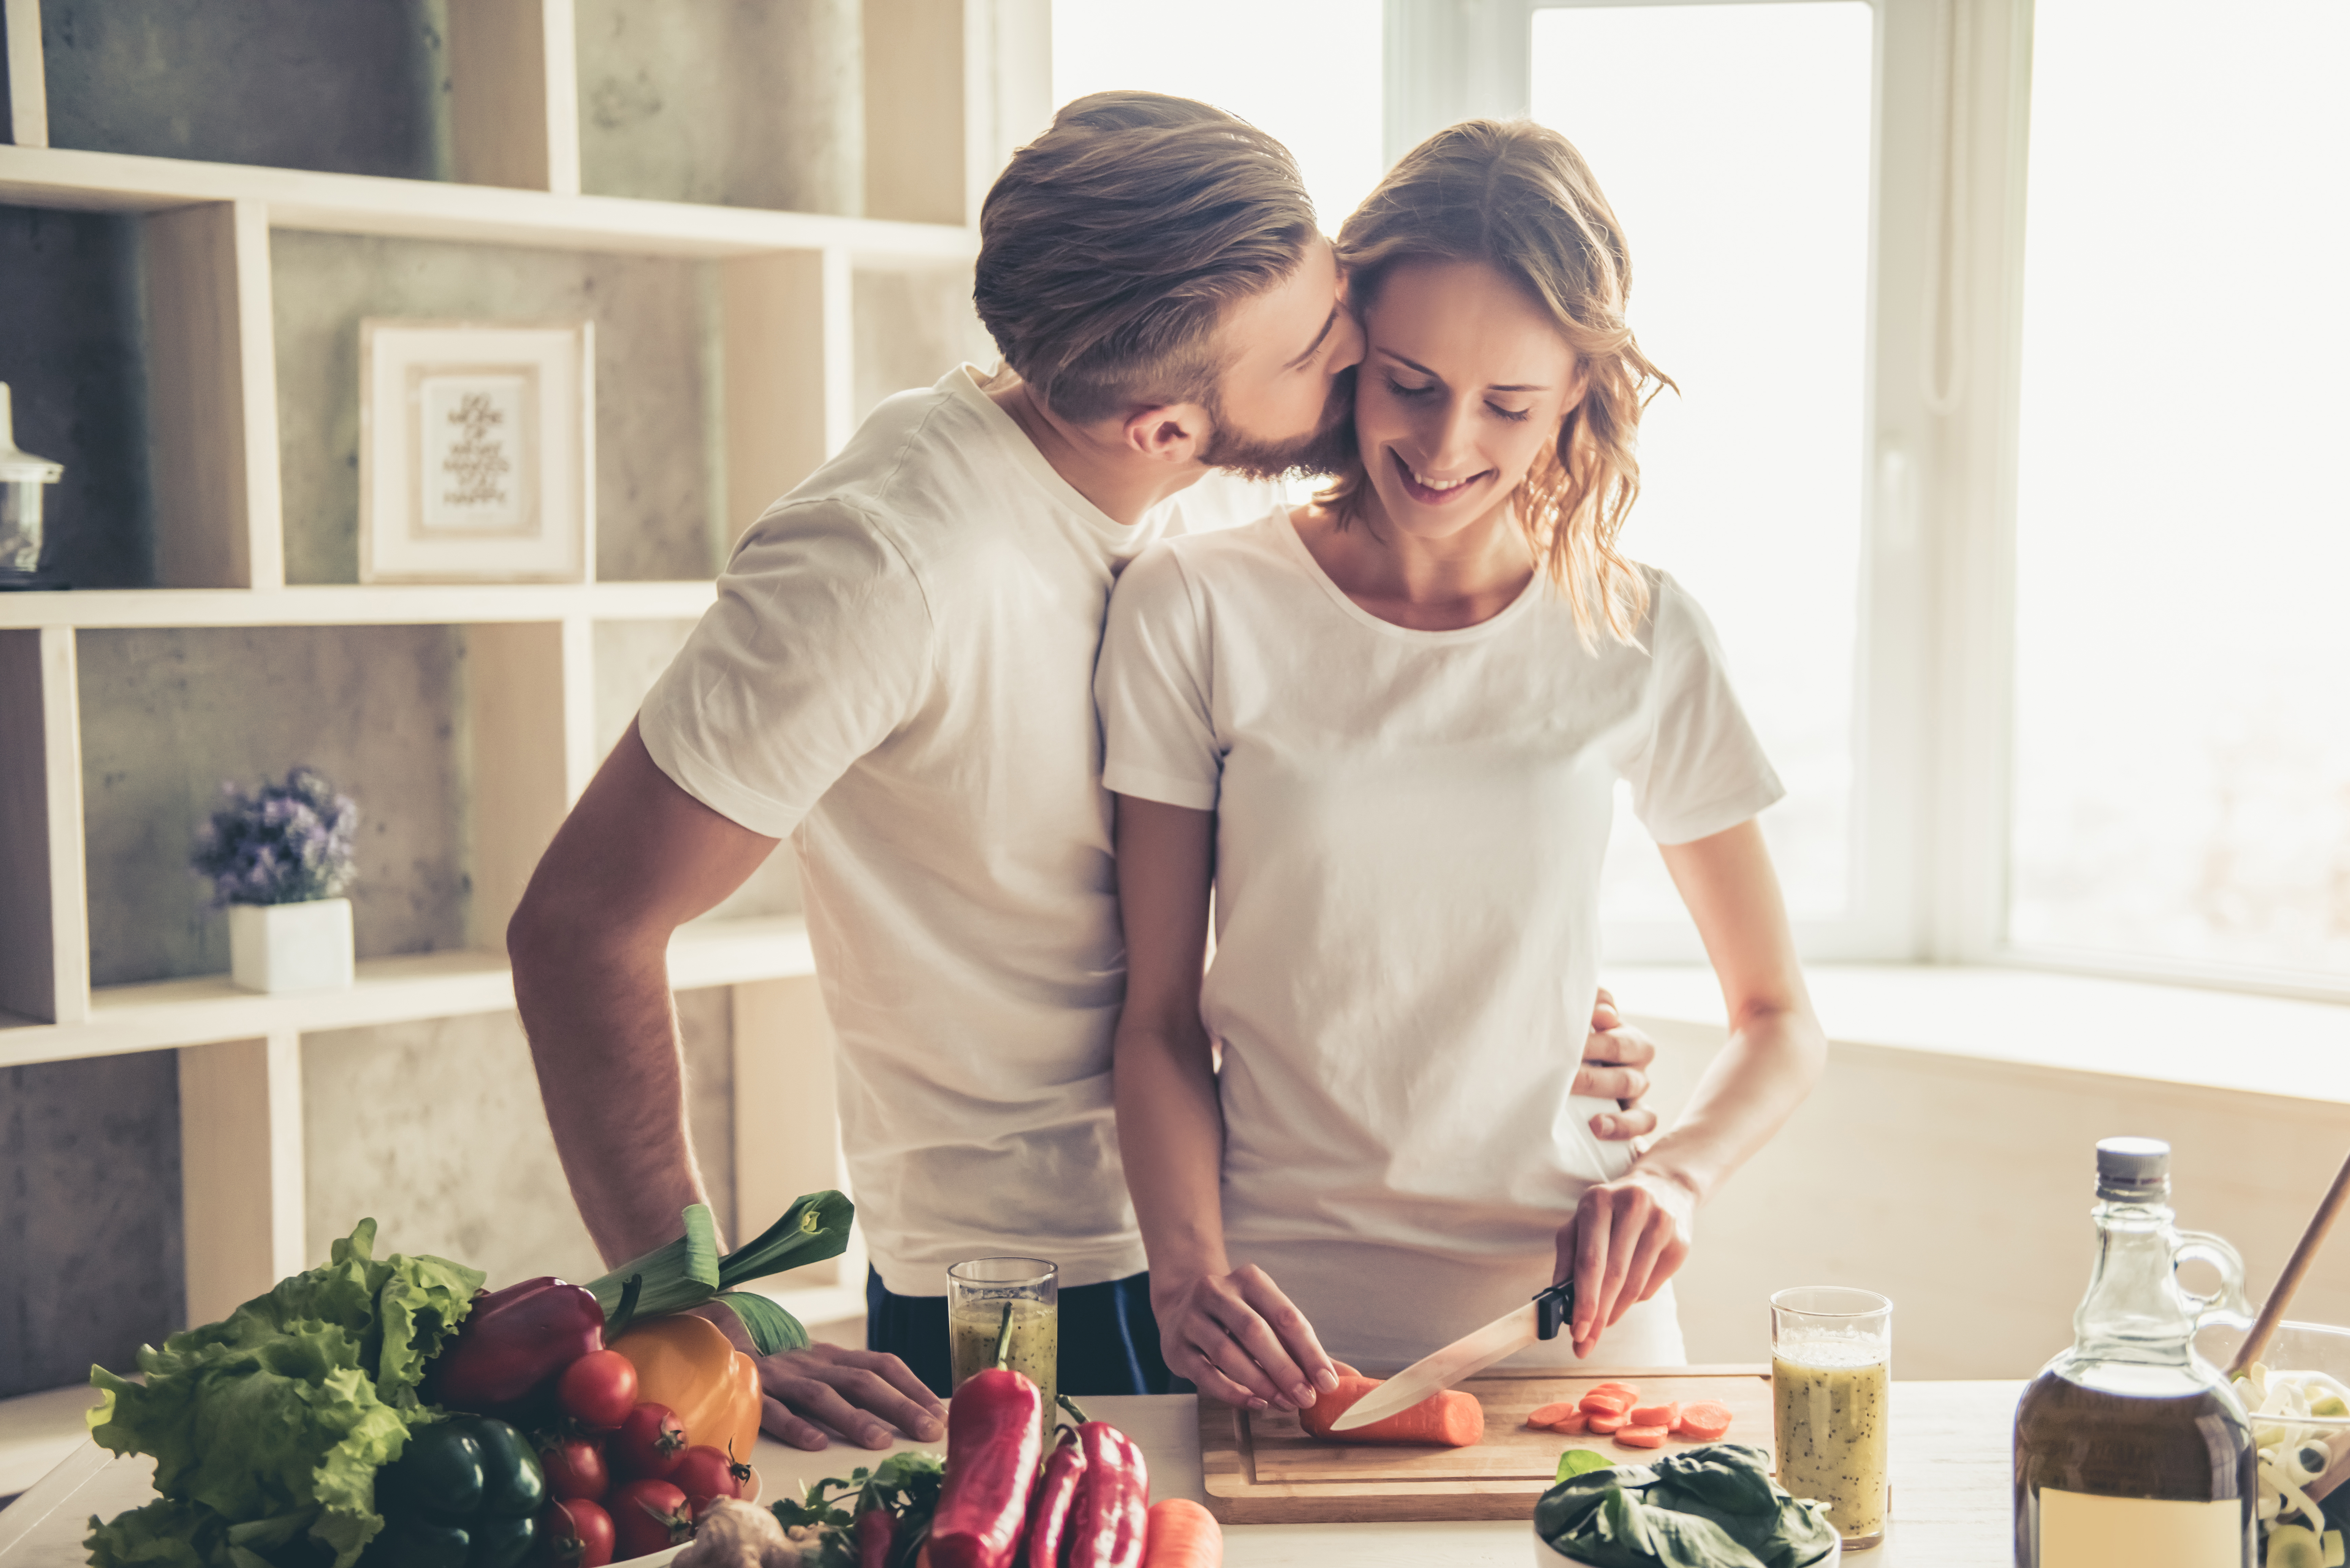 A couple cooking together | Source: Shutterstock